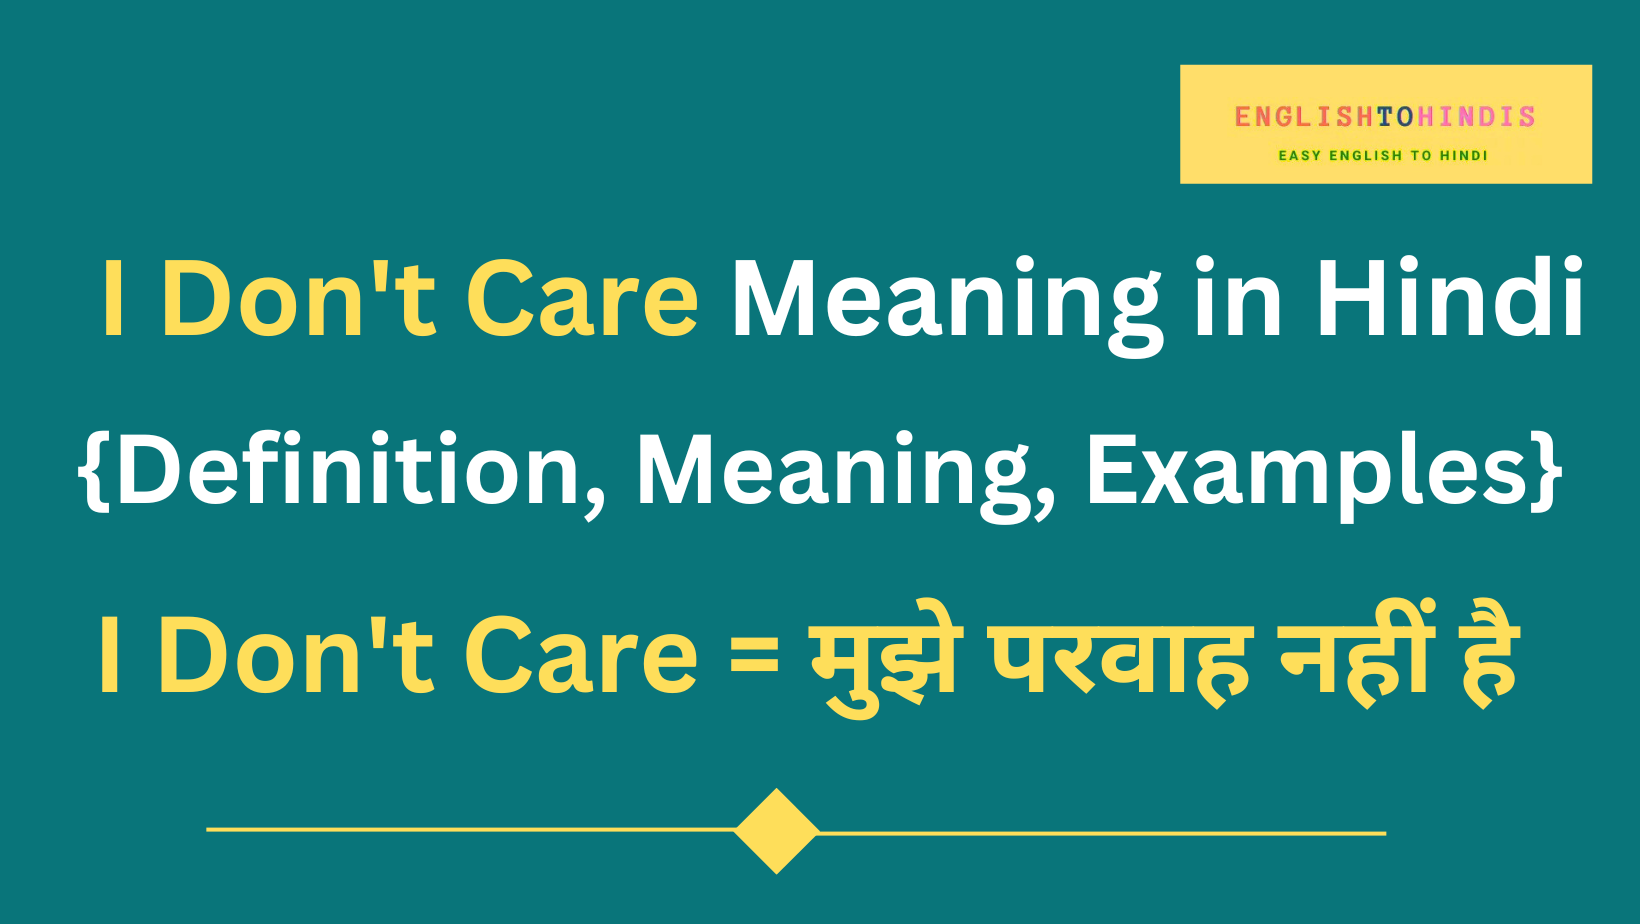 I Don't Care Meaning in Hindi